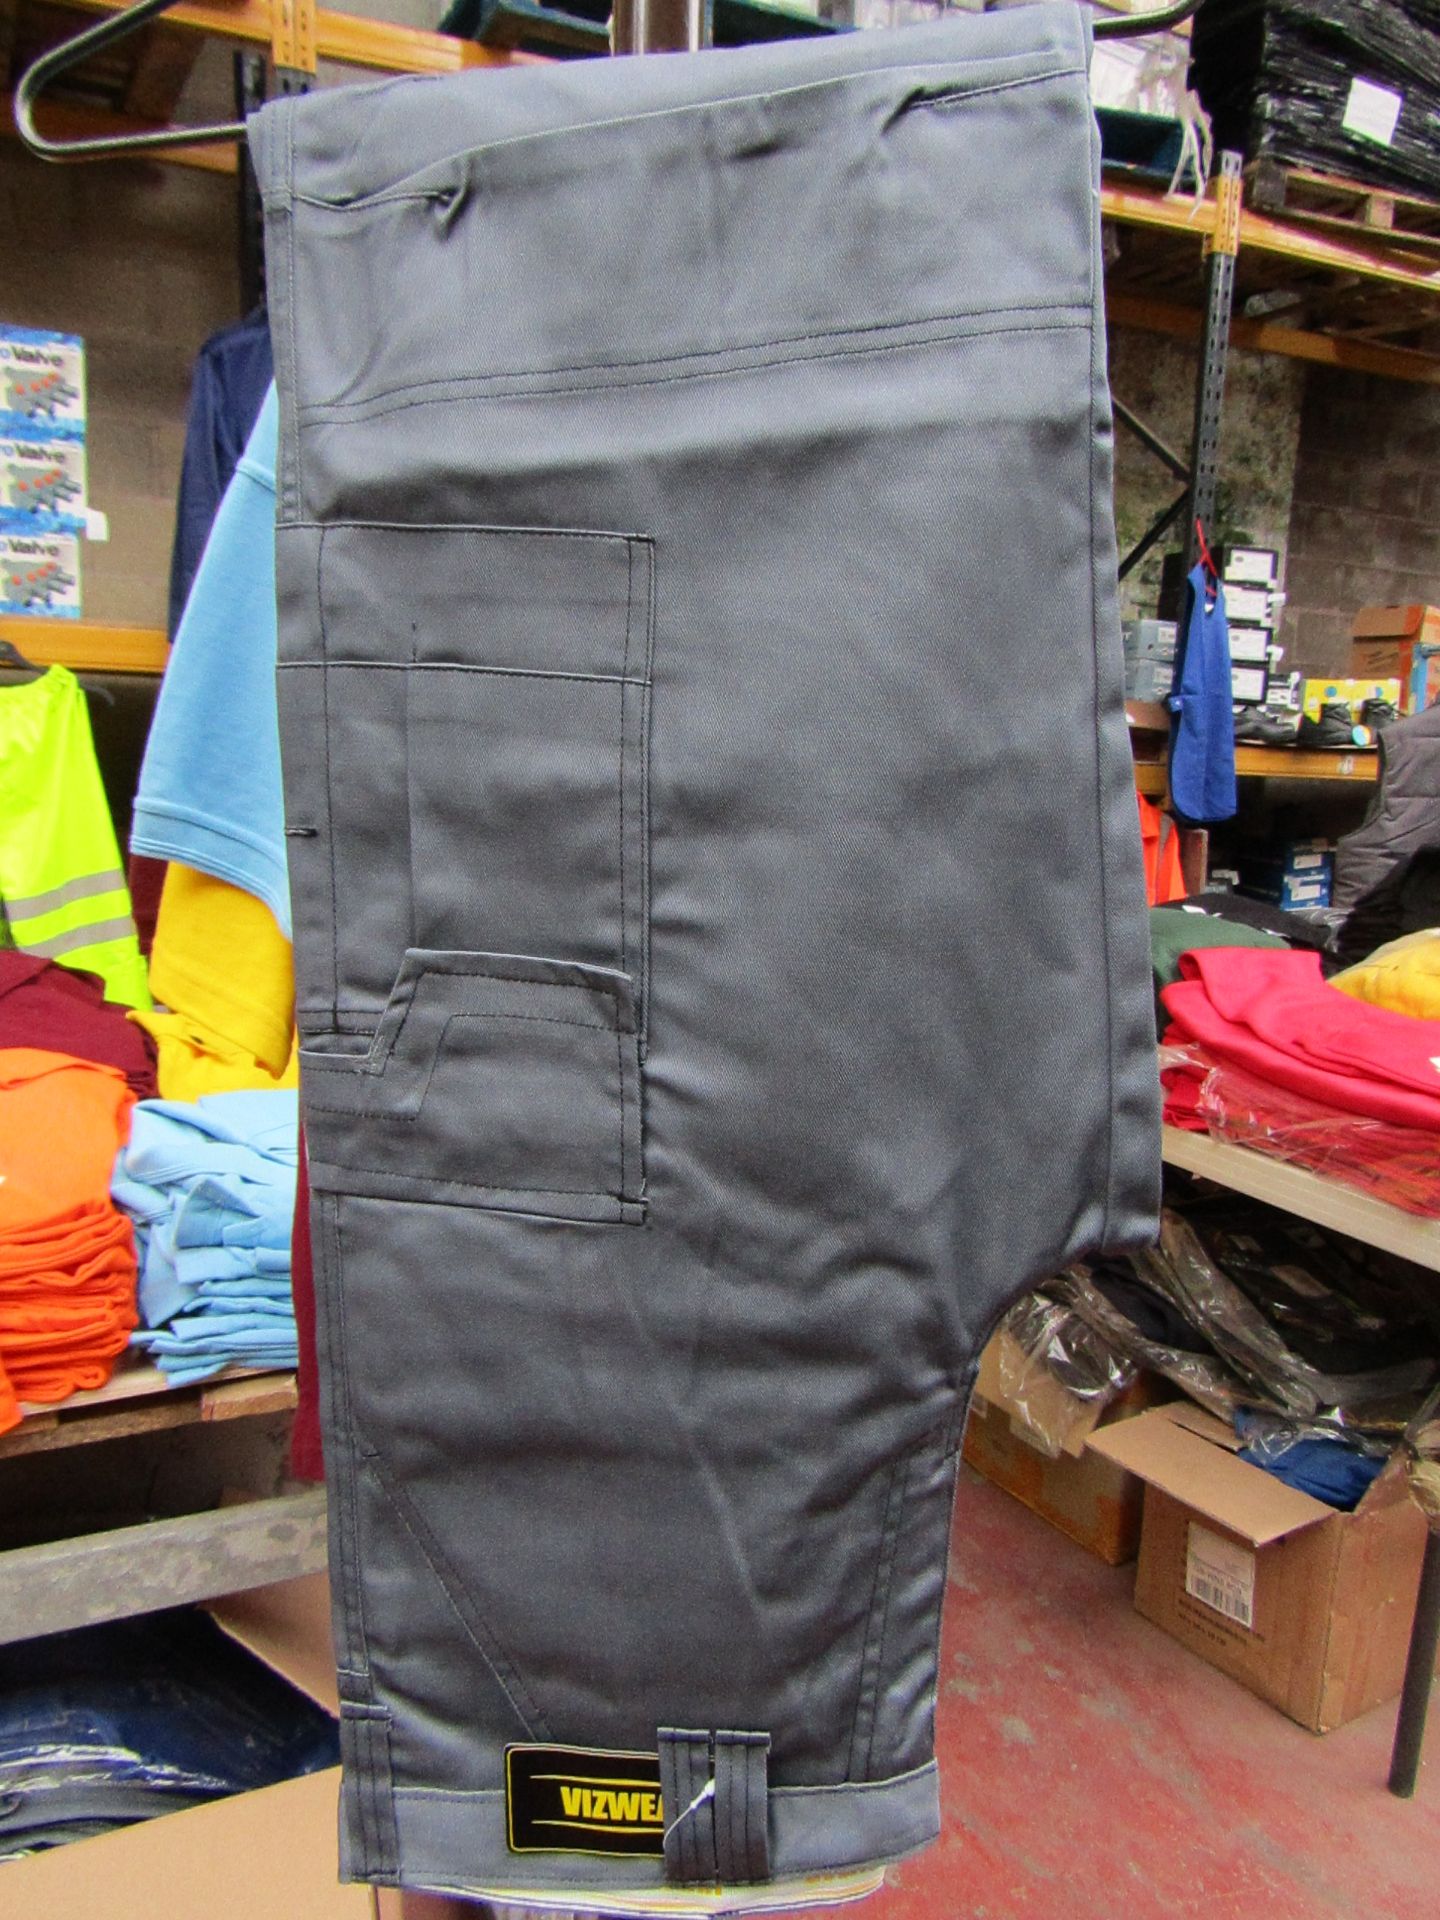 Vizwear action line trousers, size 34R, new and packaged.